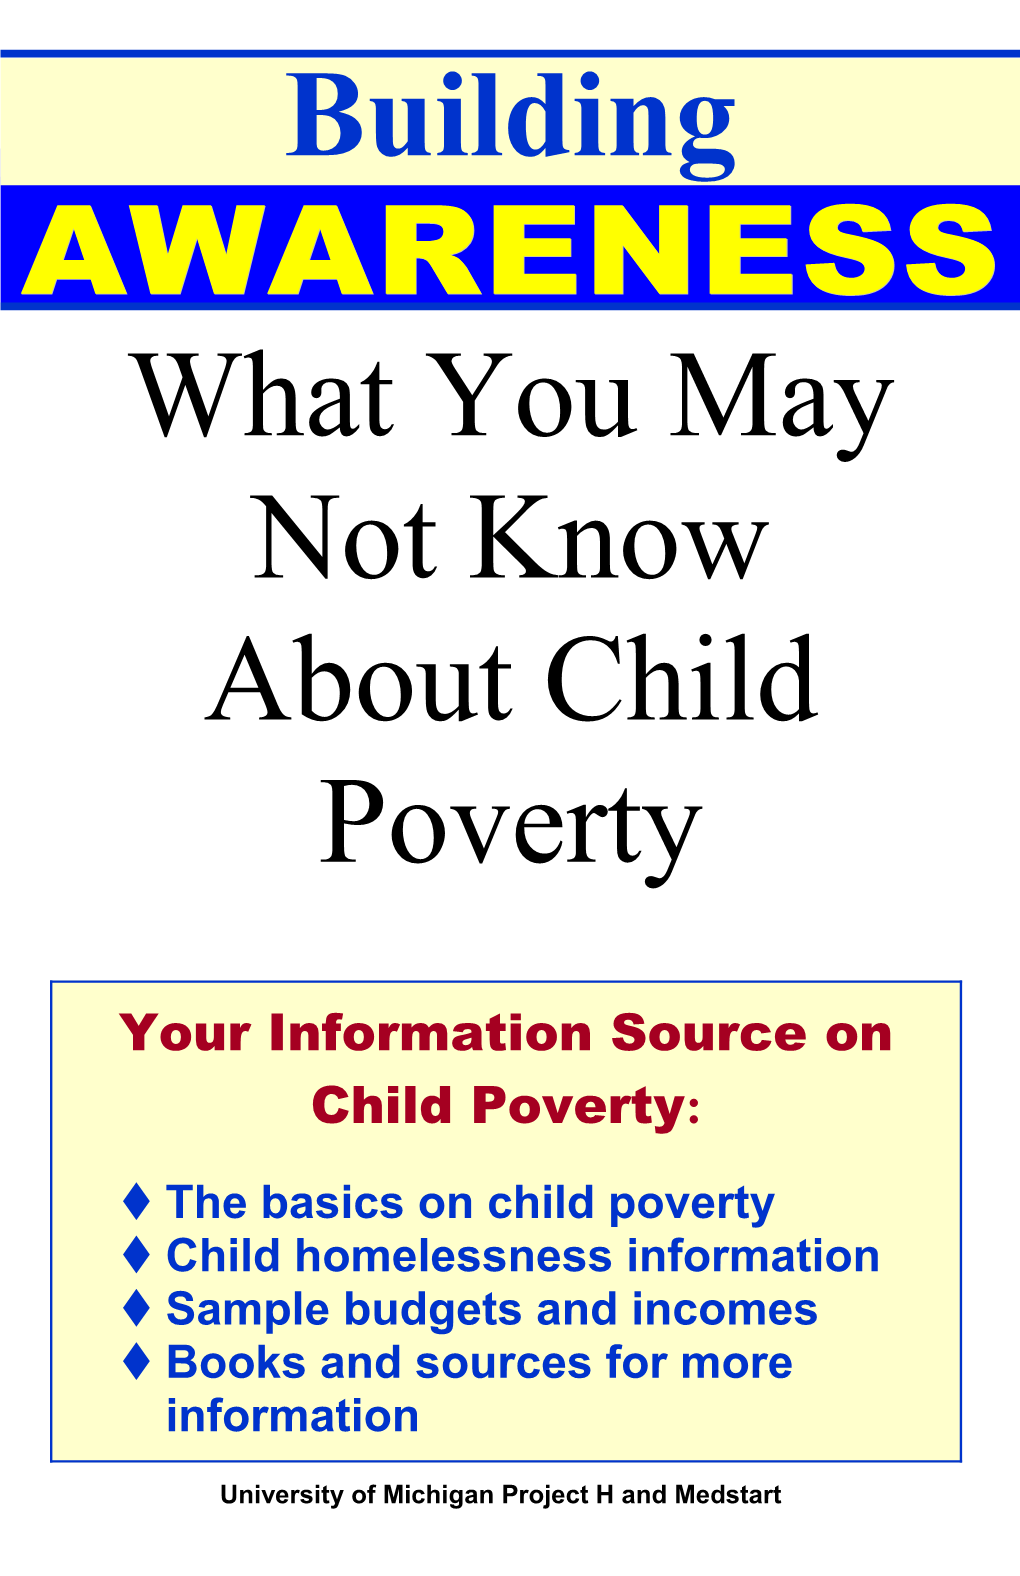 What You May Not Know About Child Poverty